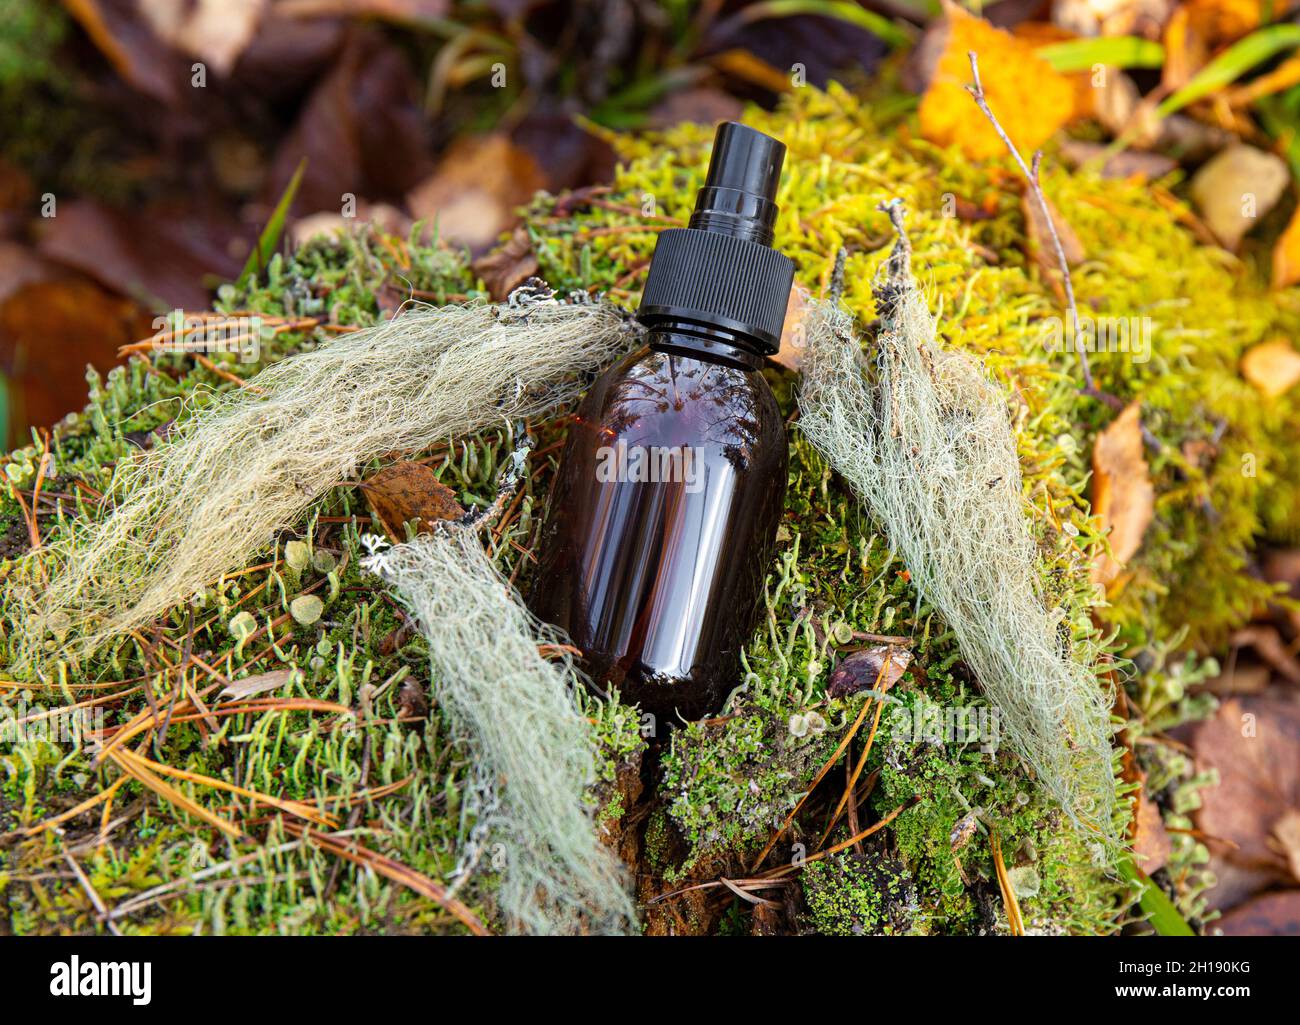 Usnea barbata or old man's beard or beard lichen tincture concept. Brown bottle with herbal medicine mixture on green moss, decorated. Stock Photo